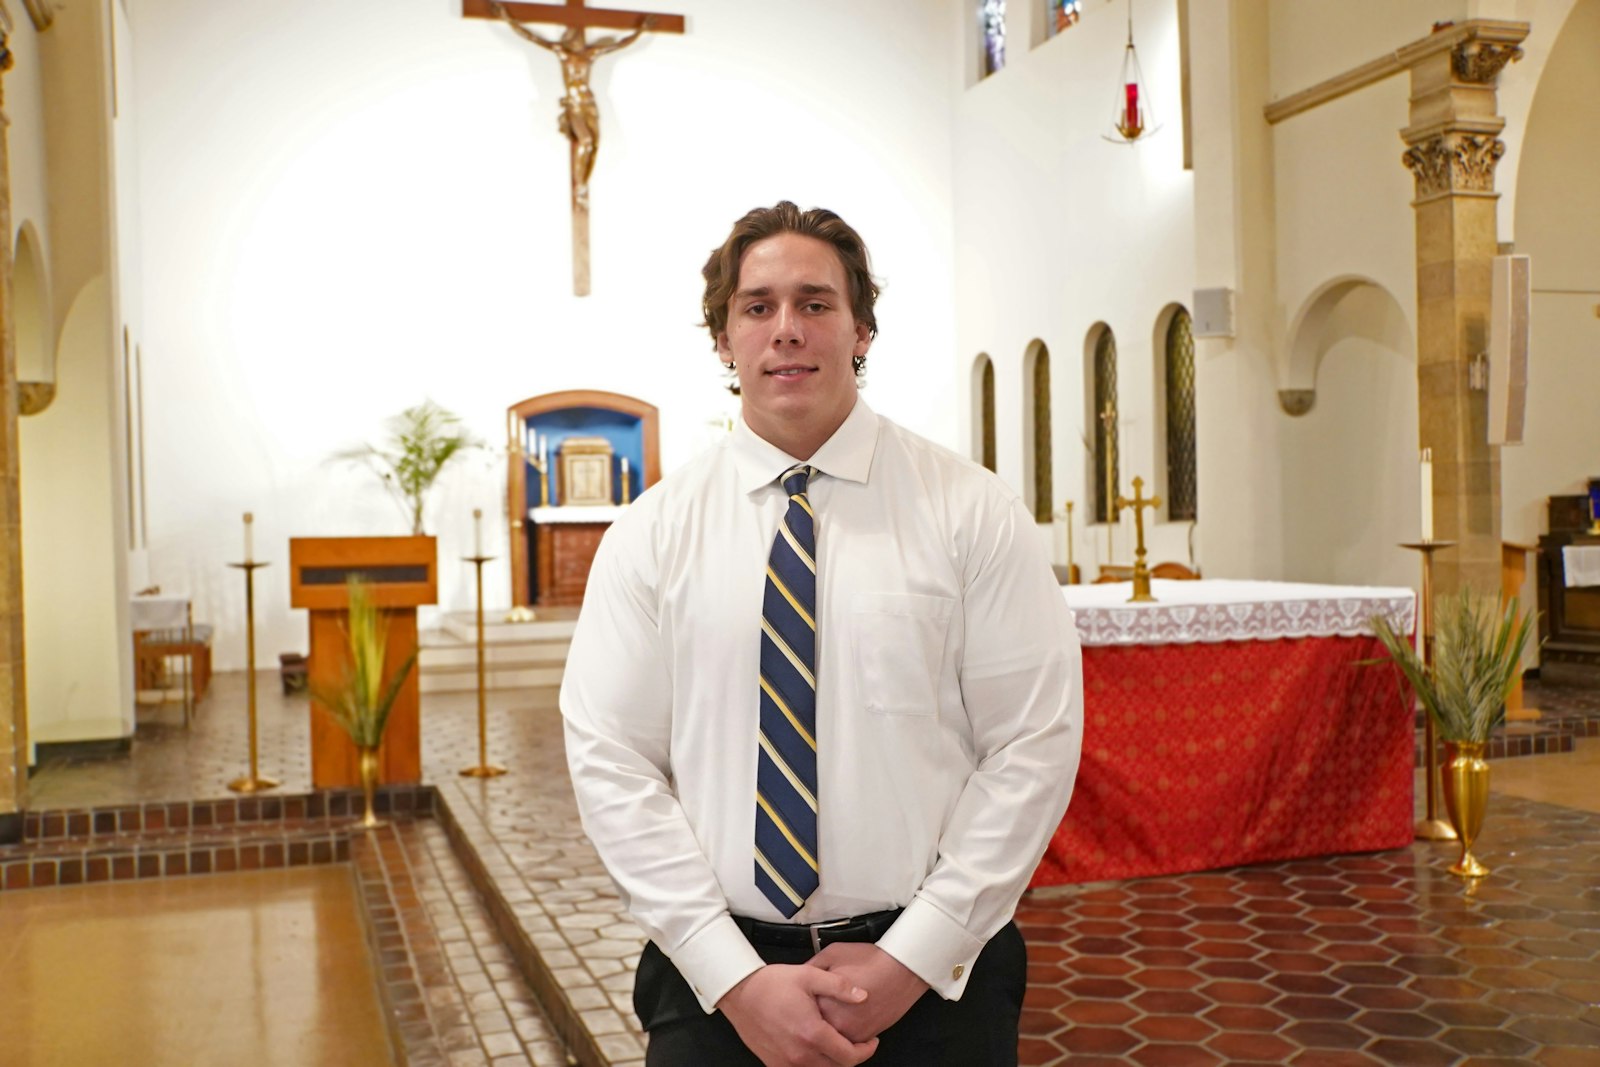 Wayne State student Charles Wesley said he rediscovered the faith in the past two years, with the help of his father and his roommates, who invited him to a Bible study. He described the OCIA process at Detroit Catholic Campus Ministry as "night and day" from when he was in catechism class in middle school.